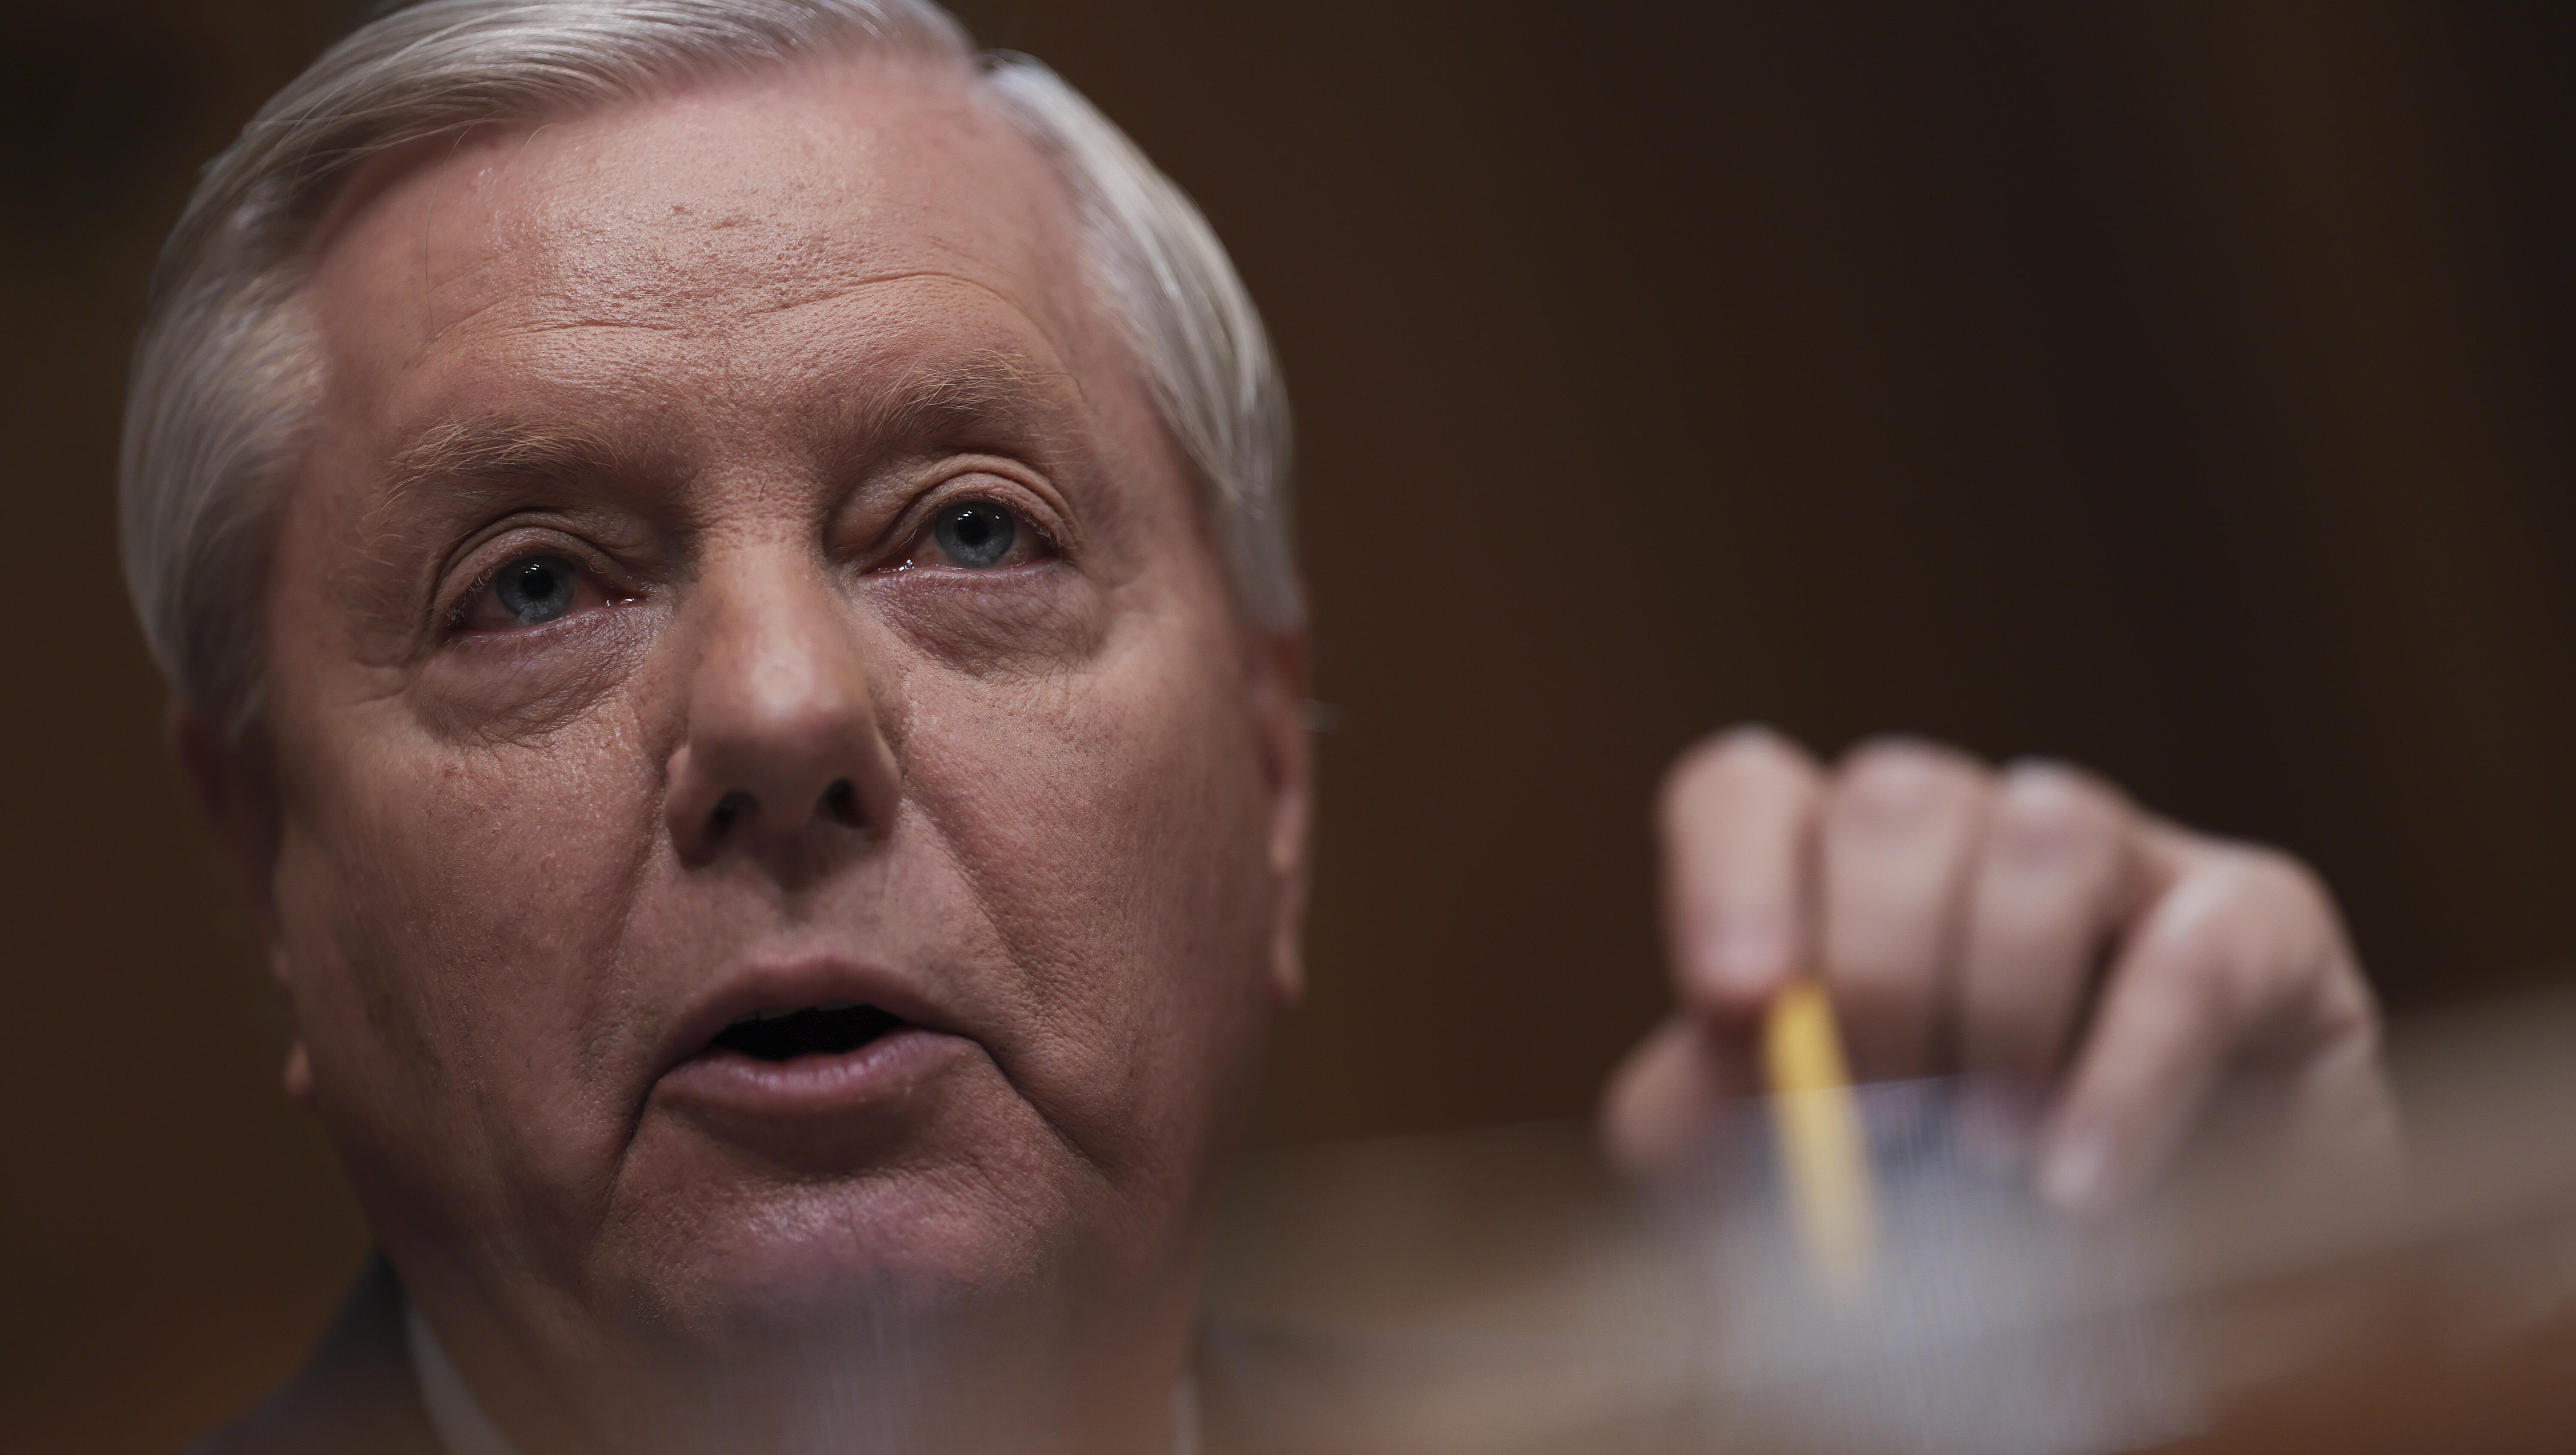 Graham responds to Russian ‘arrest warrant’ issued over Ukraine comments